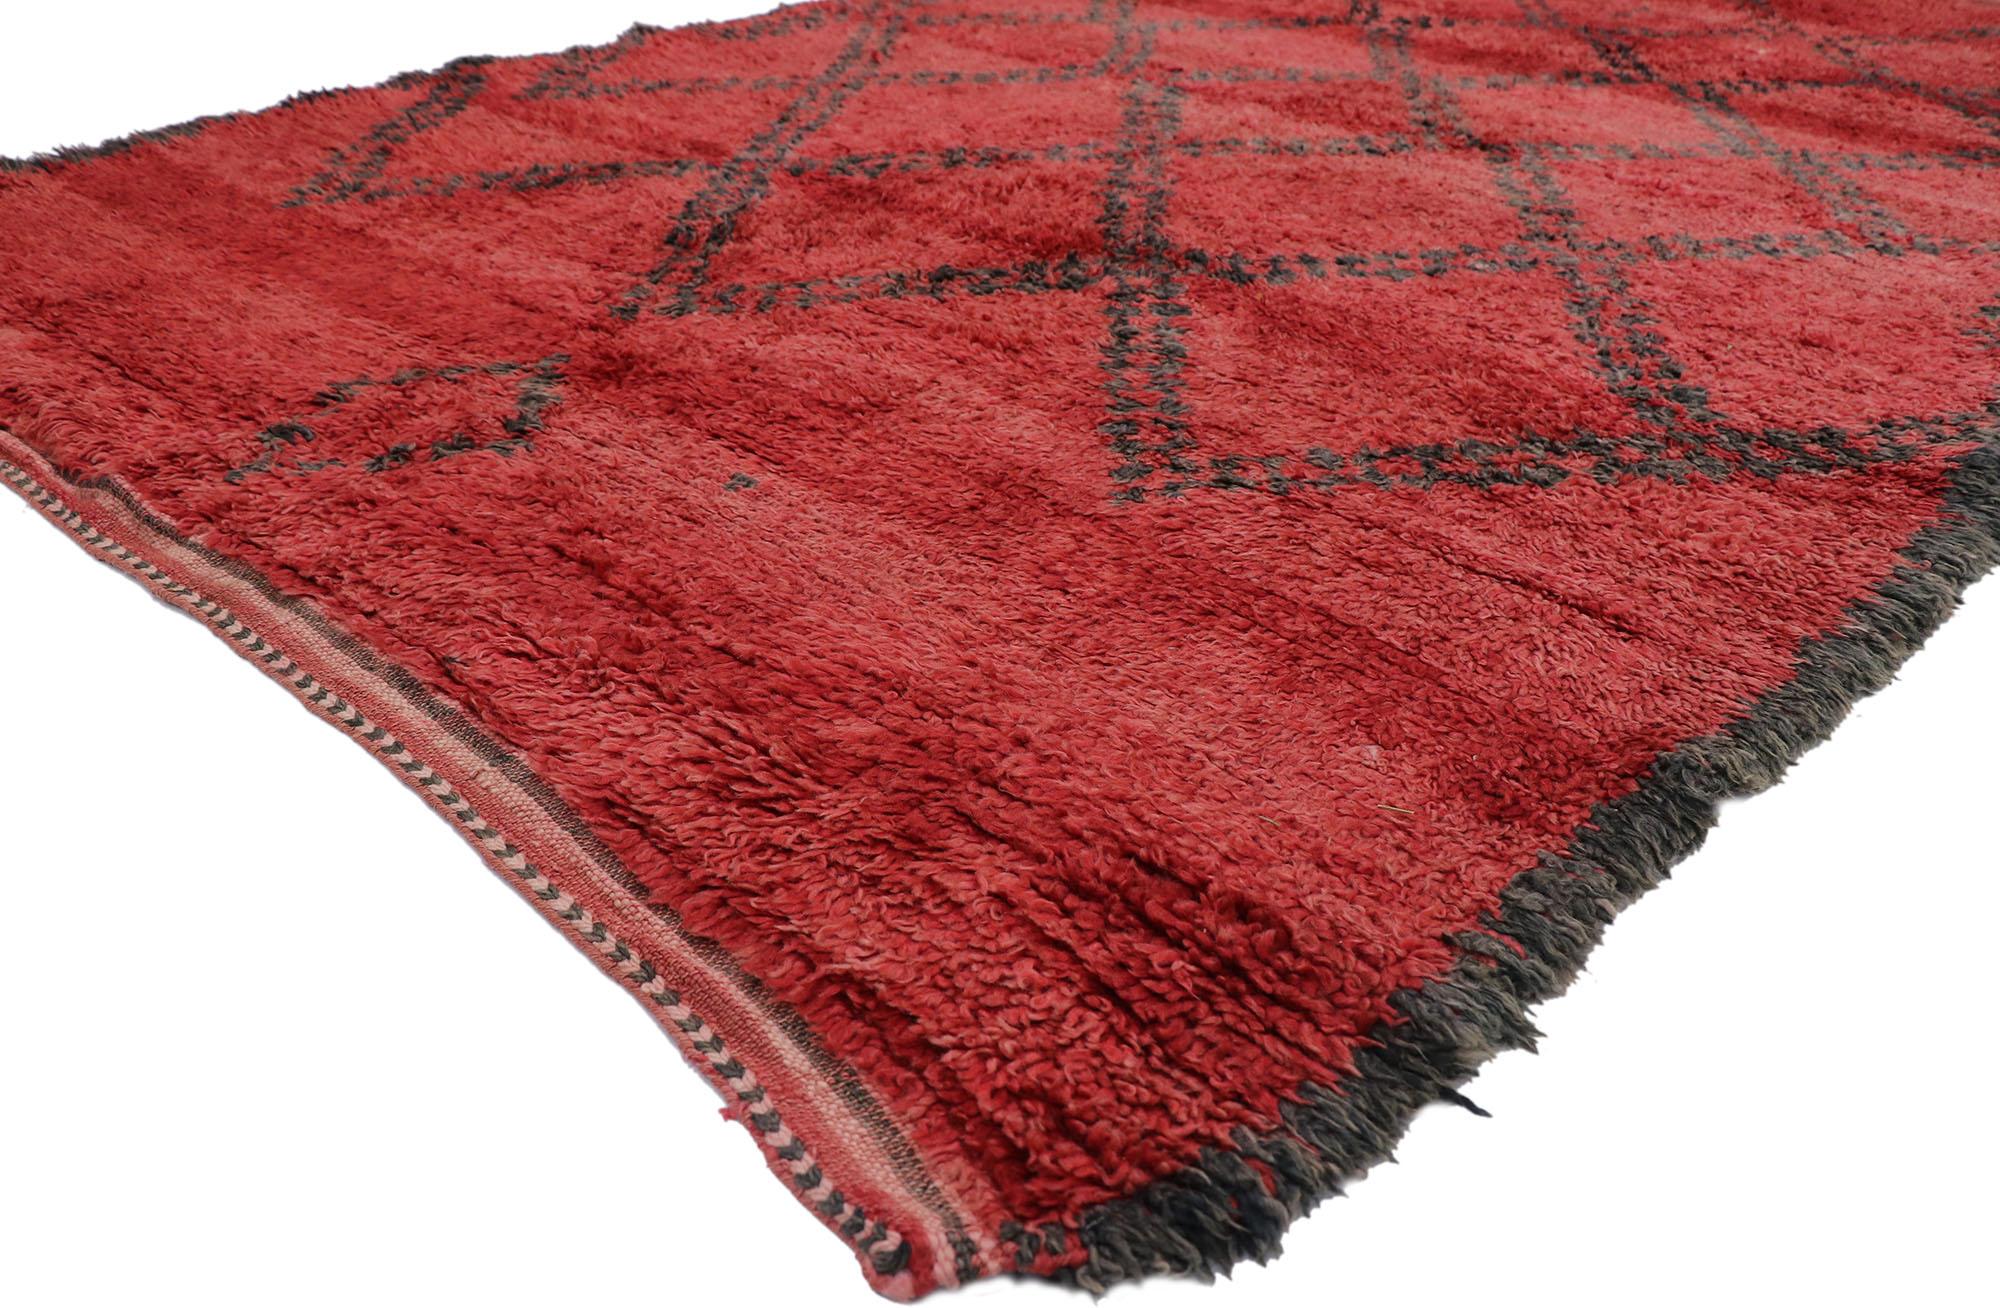 21276, vintage Berber Beni M'Guild Moroccan rug with Modern Tribal style. With its luminous fiery glow, plush pile and tribal style, this hand knotted wool vintage Beni M'Guild Moroccan rug is a captivating vision of woven beauty. The abrashed red